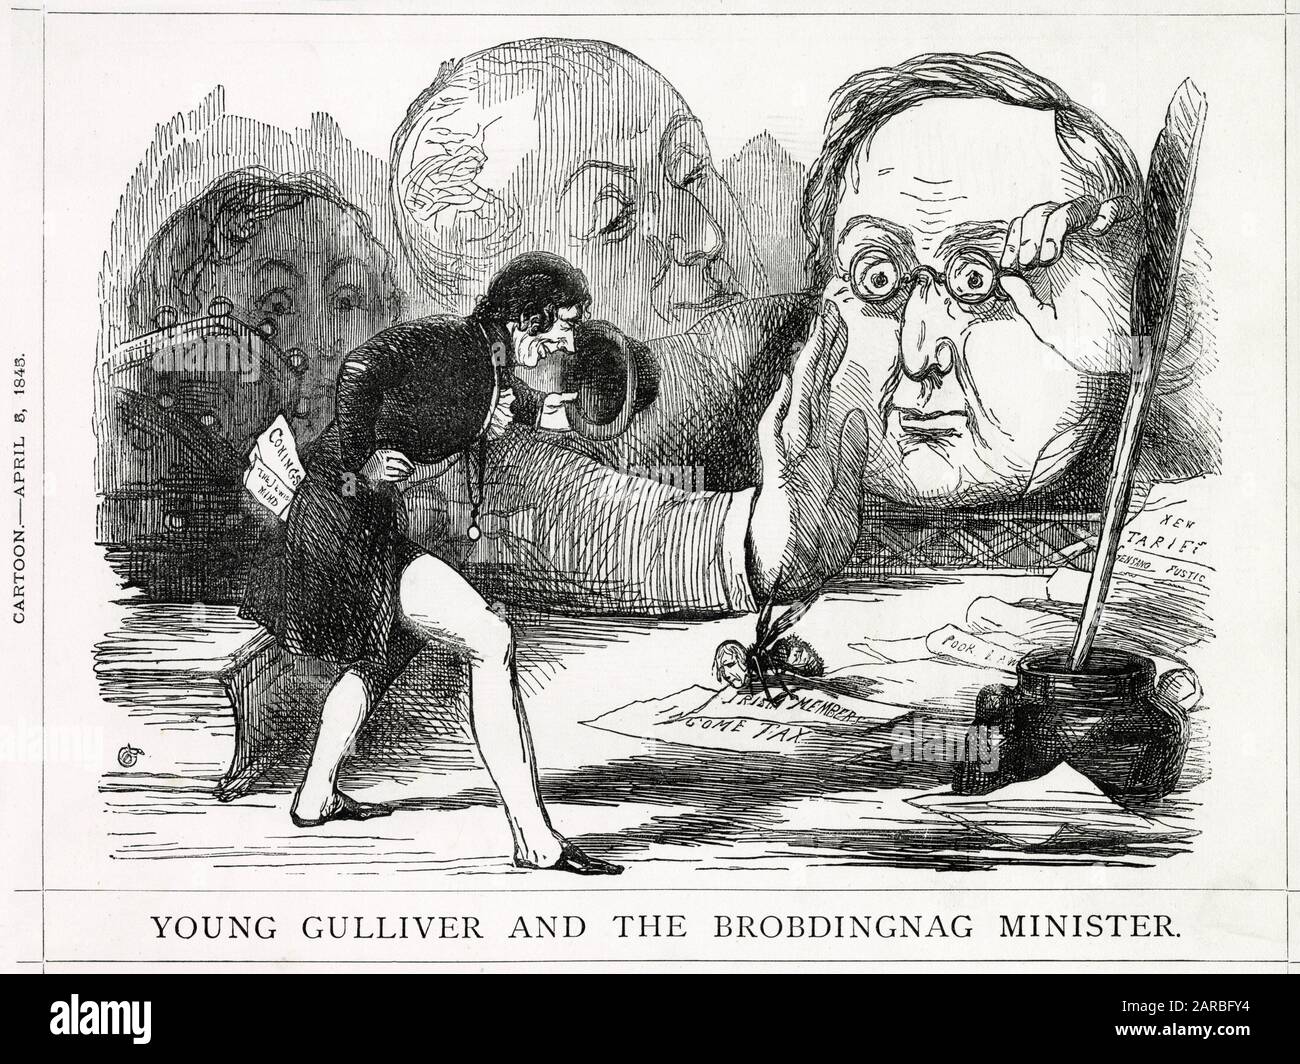 Cartoon, Young Gulliver and the Brobdingnag Minister -- a satirical comment on Benjamin Disraeli's constant attacks on Sir Robert Peel during the latter's time as Prime Minister, with a reference to Gulliver's Travels by Jonathan Swift. Stock Photo